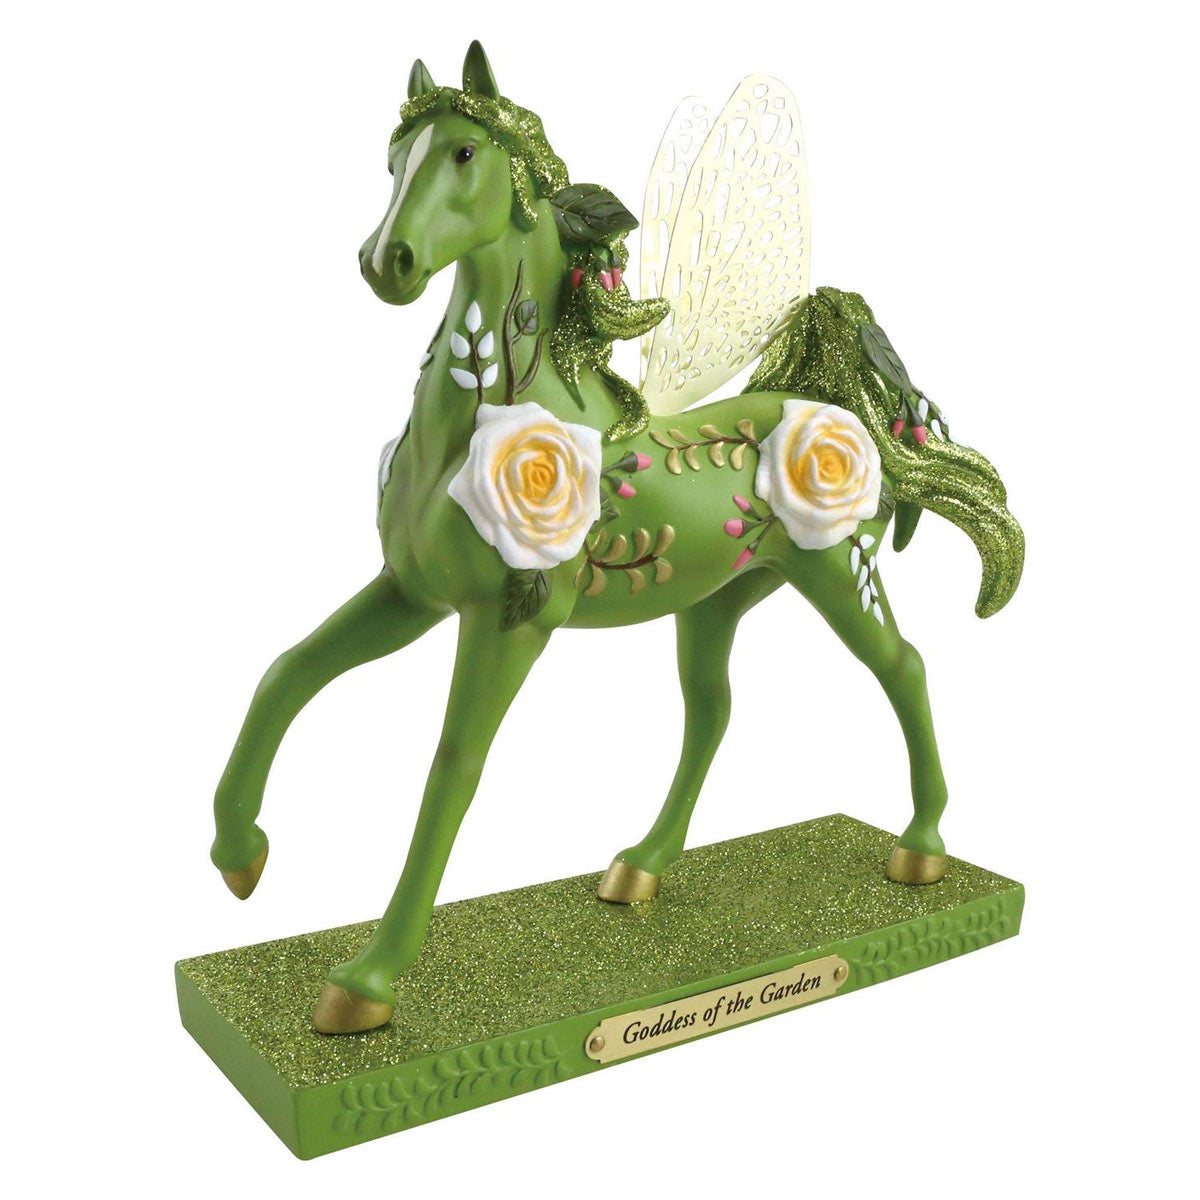 Painted Ponies Goddess of the Garden Figurine FOB